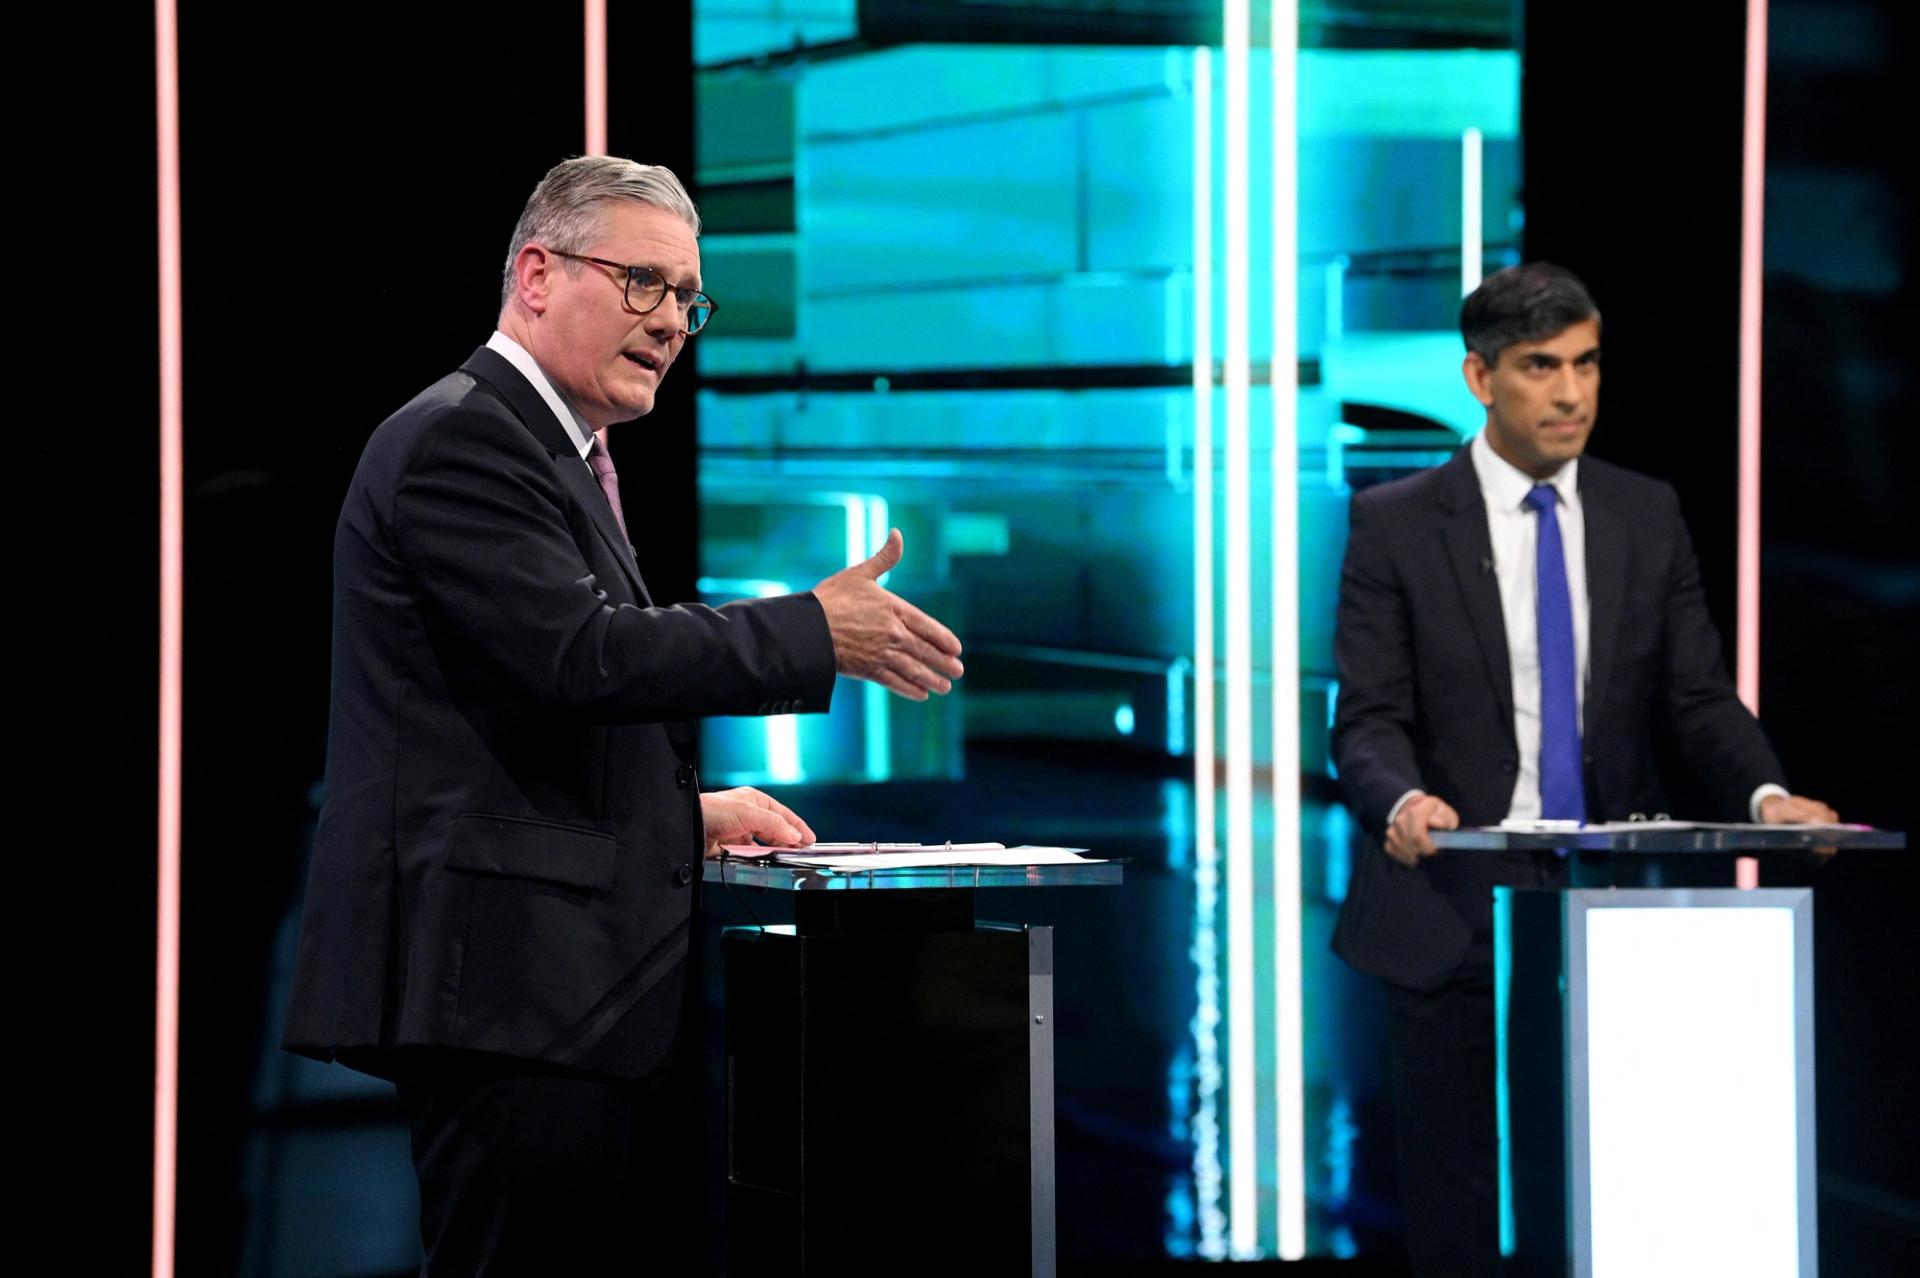 Rishi Sunak and Keir Starmer lock heads at the first head-to-head debate of the UK general election campaign